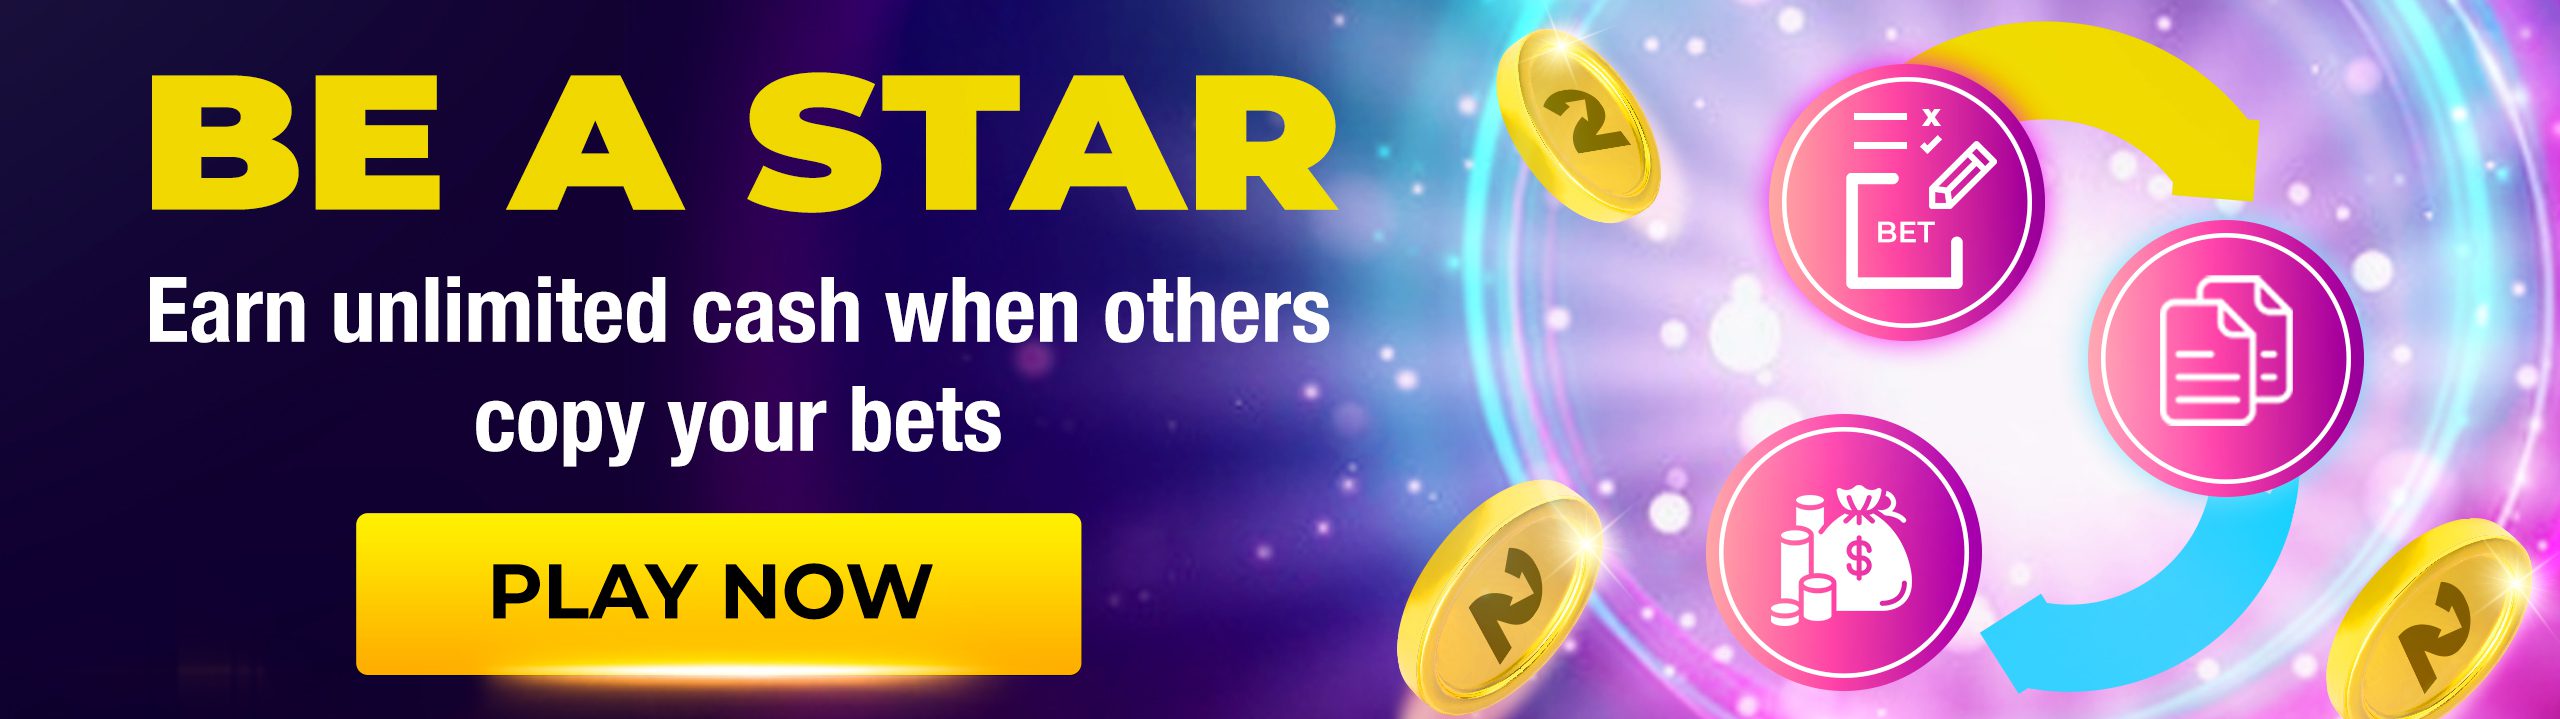 Be a Star: Warn unlimited cash when others copy your bet